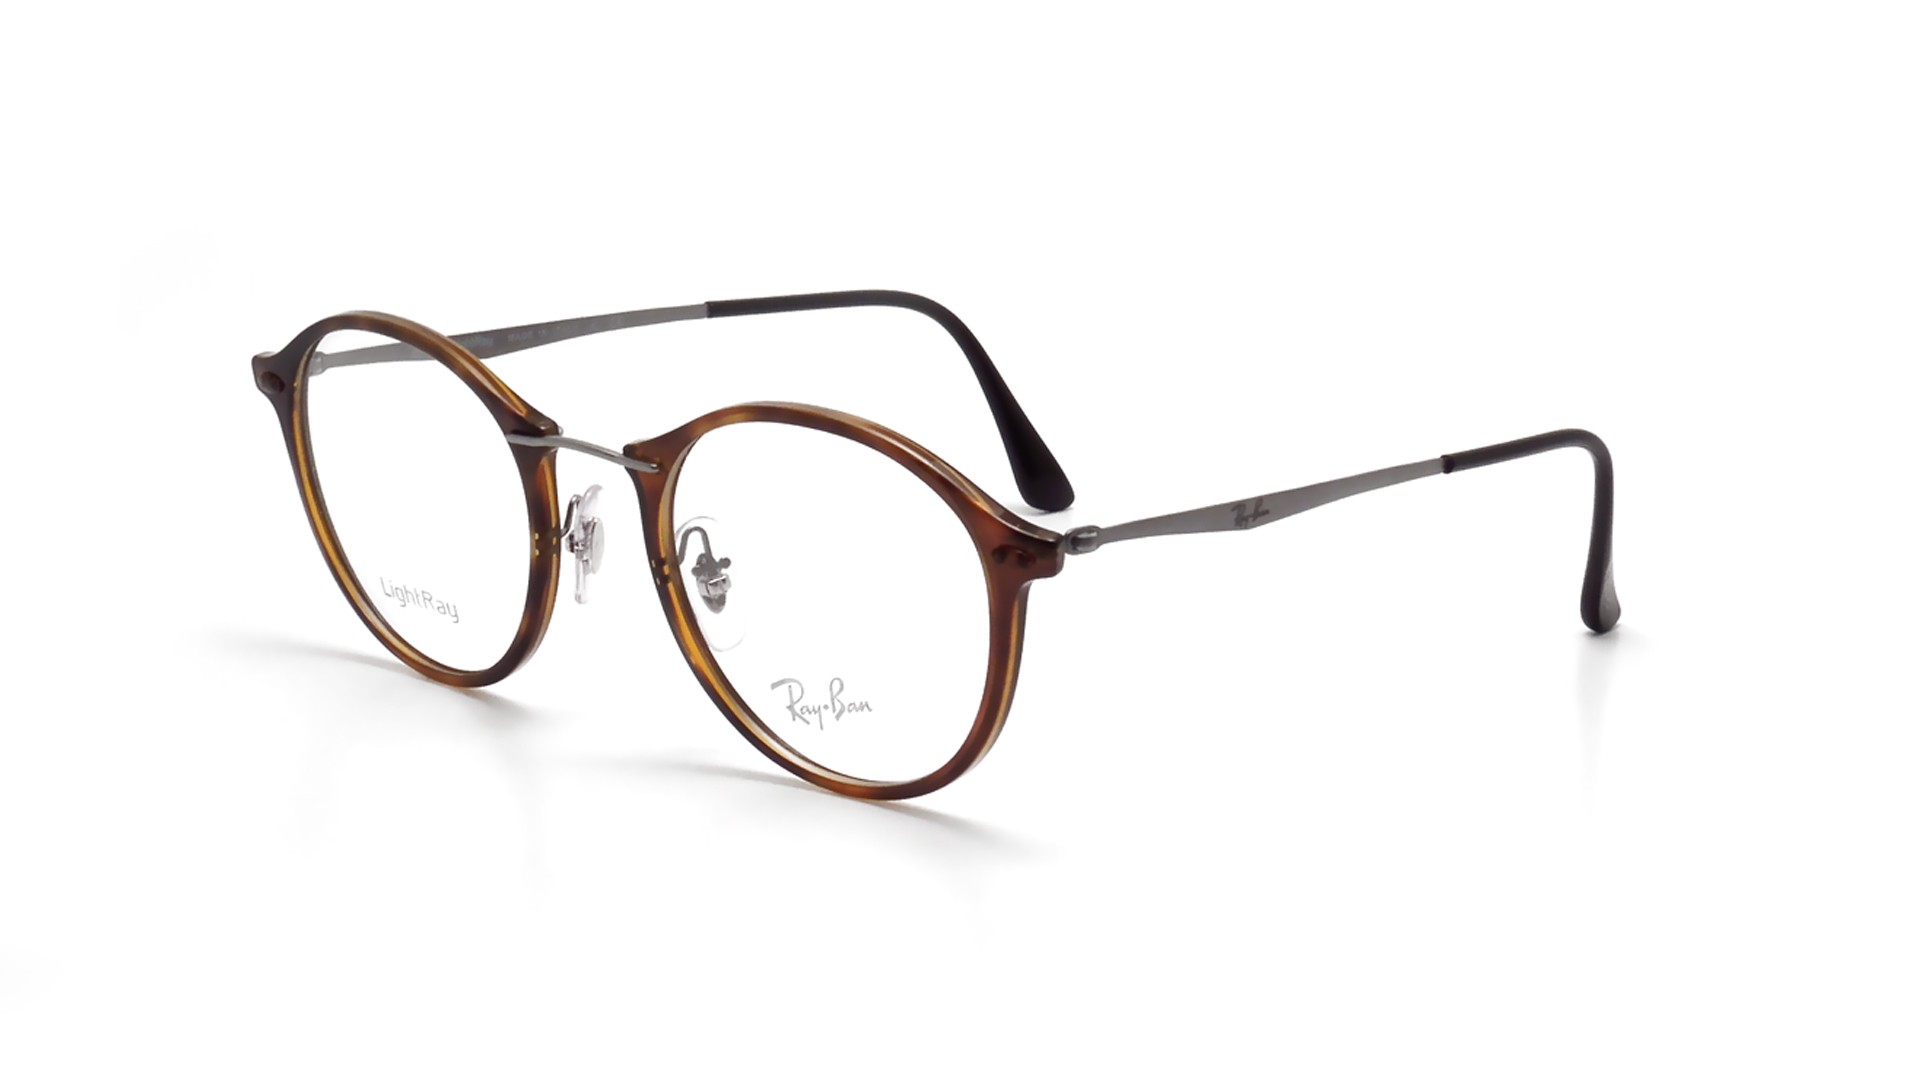 ray ban lightray frames \u003e Up to 68% OFF 